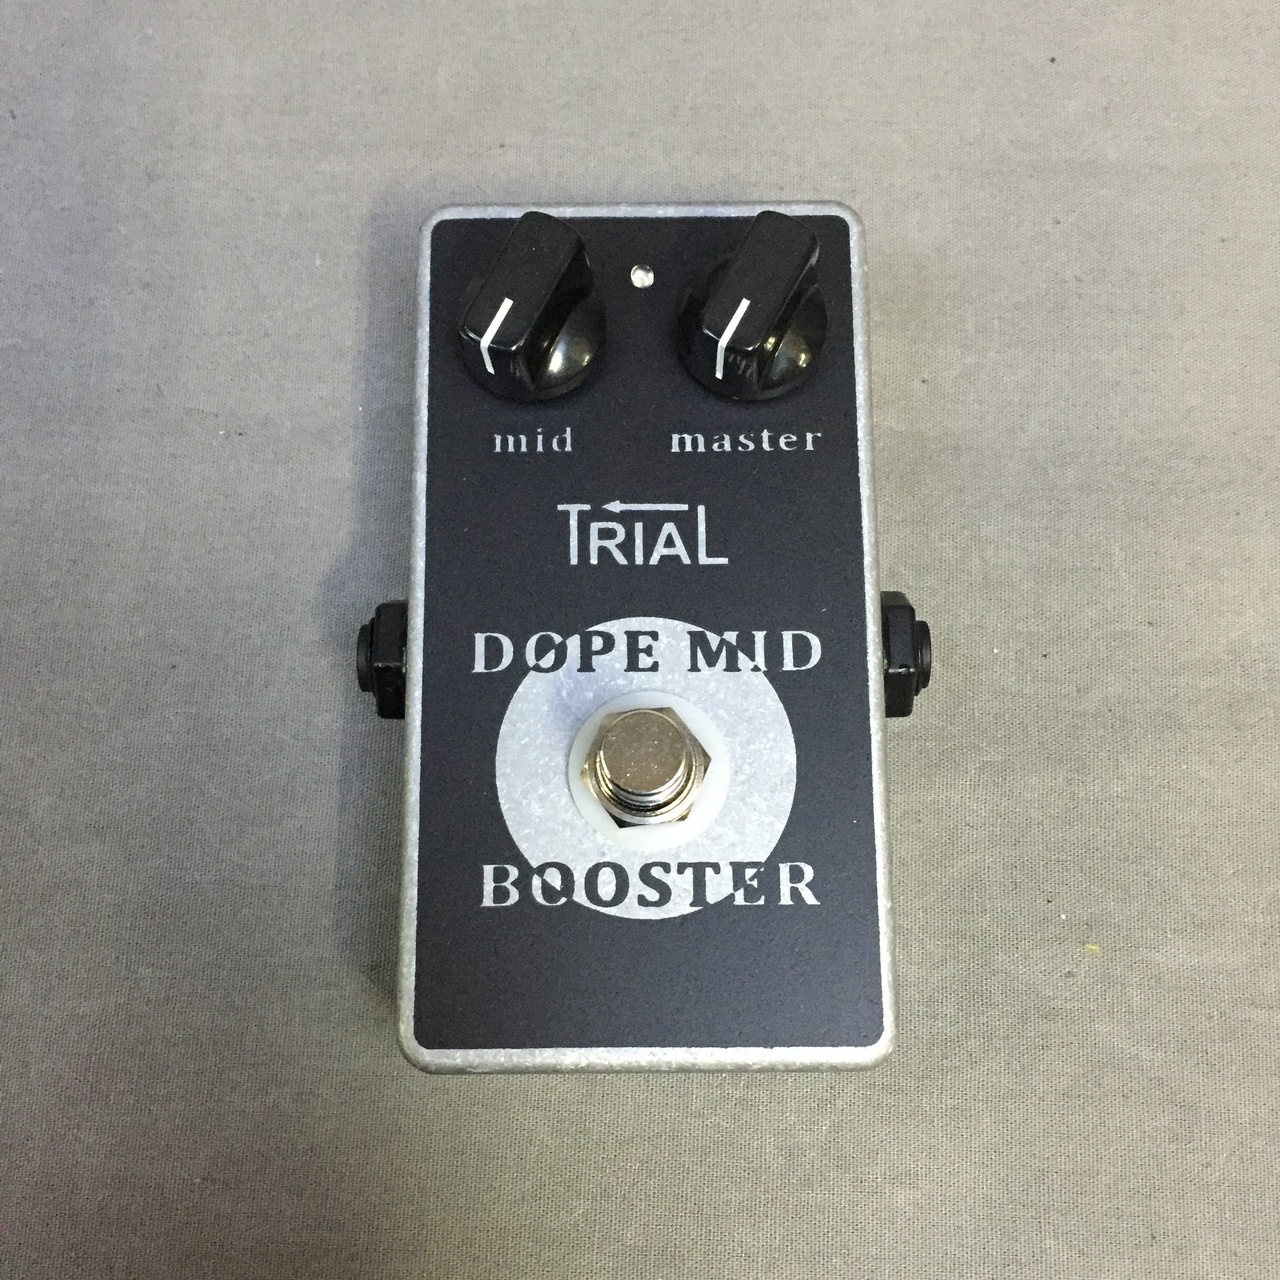 TRIAL / DOPE MID BOOSTER ブースター